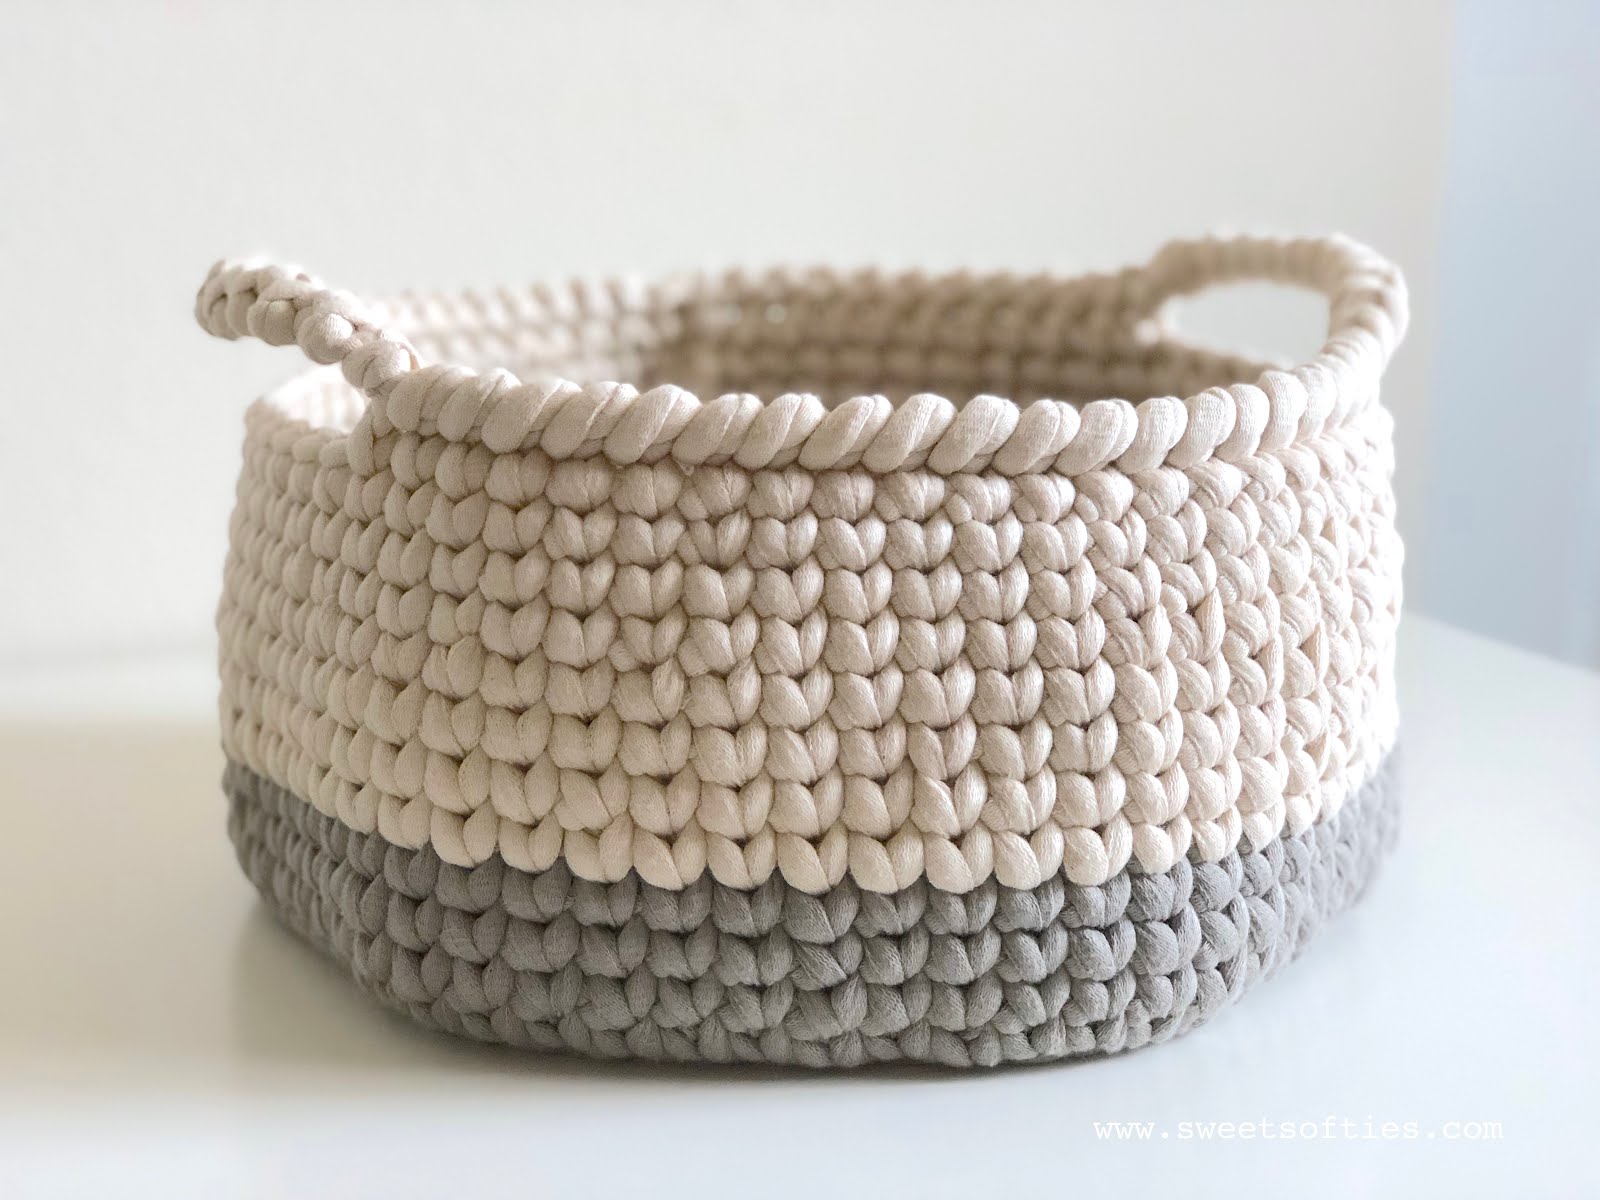 How to Crochet a Basket: FREE Tutorial & Pattern